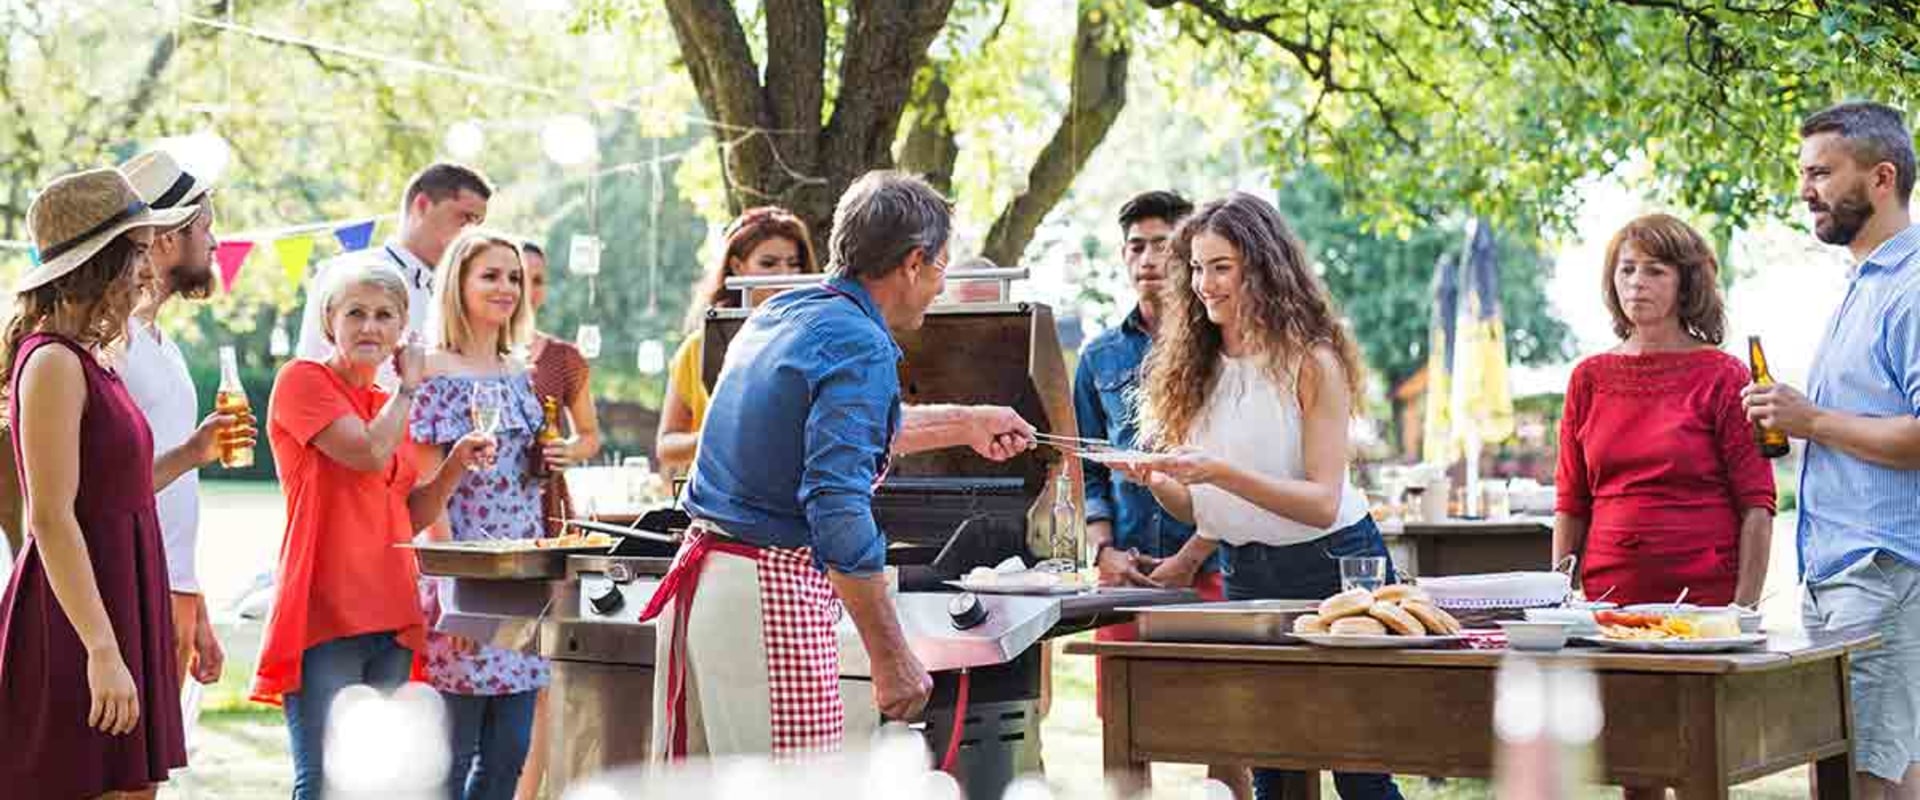 Fun Ideas for Picnics and Barbecues